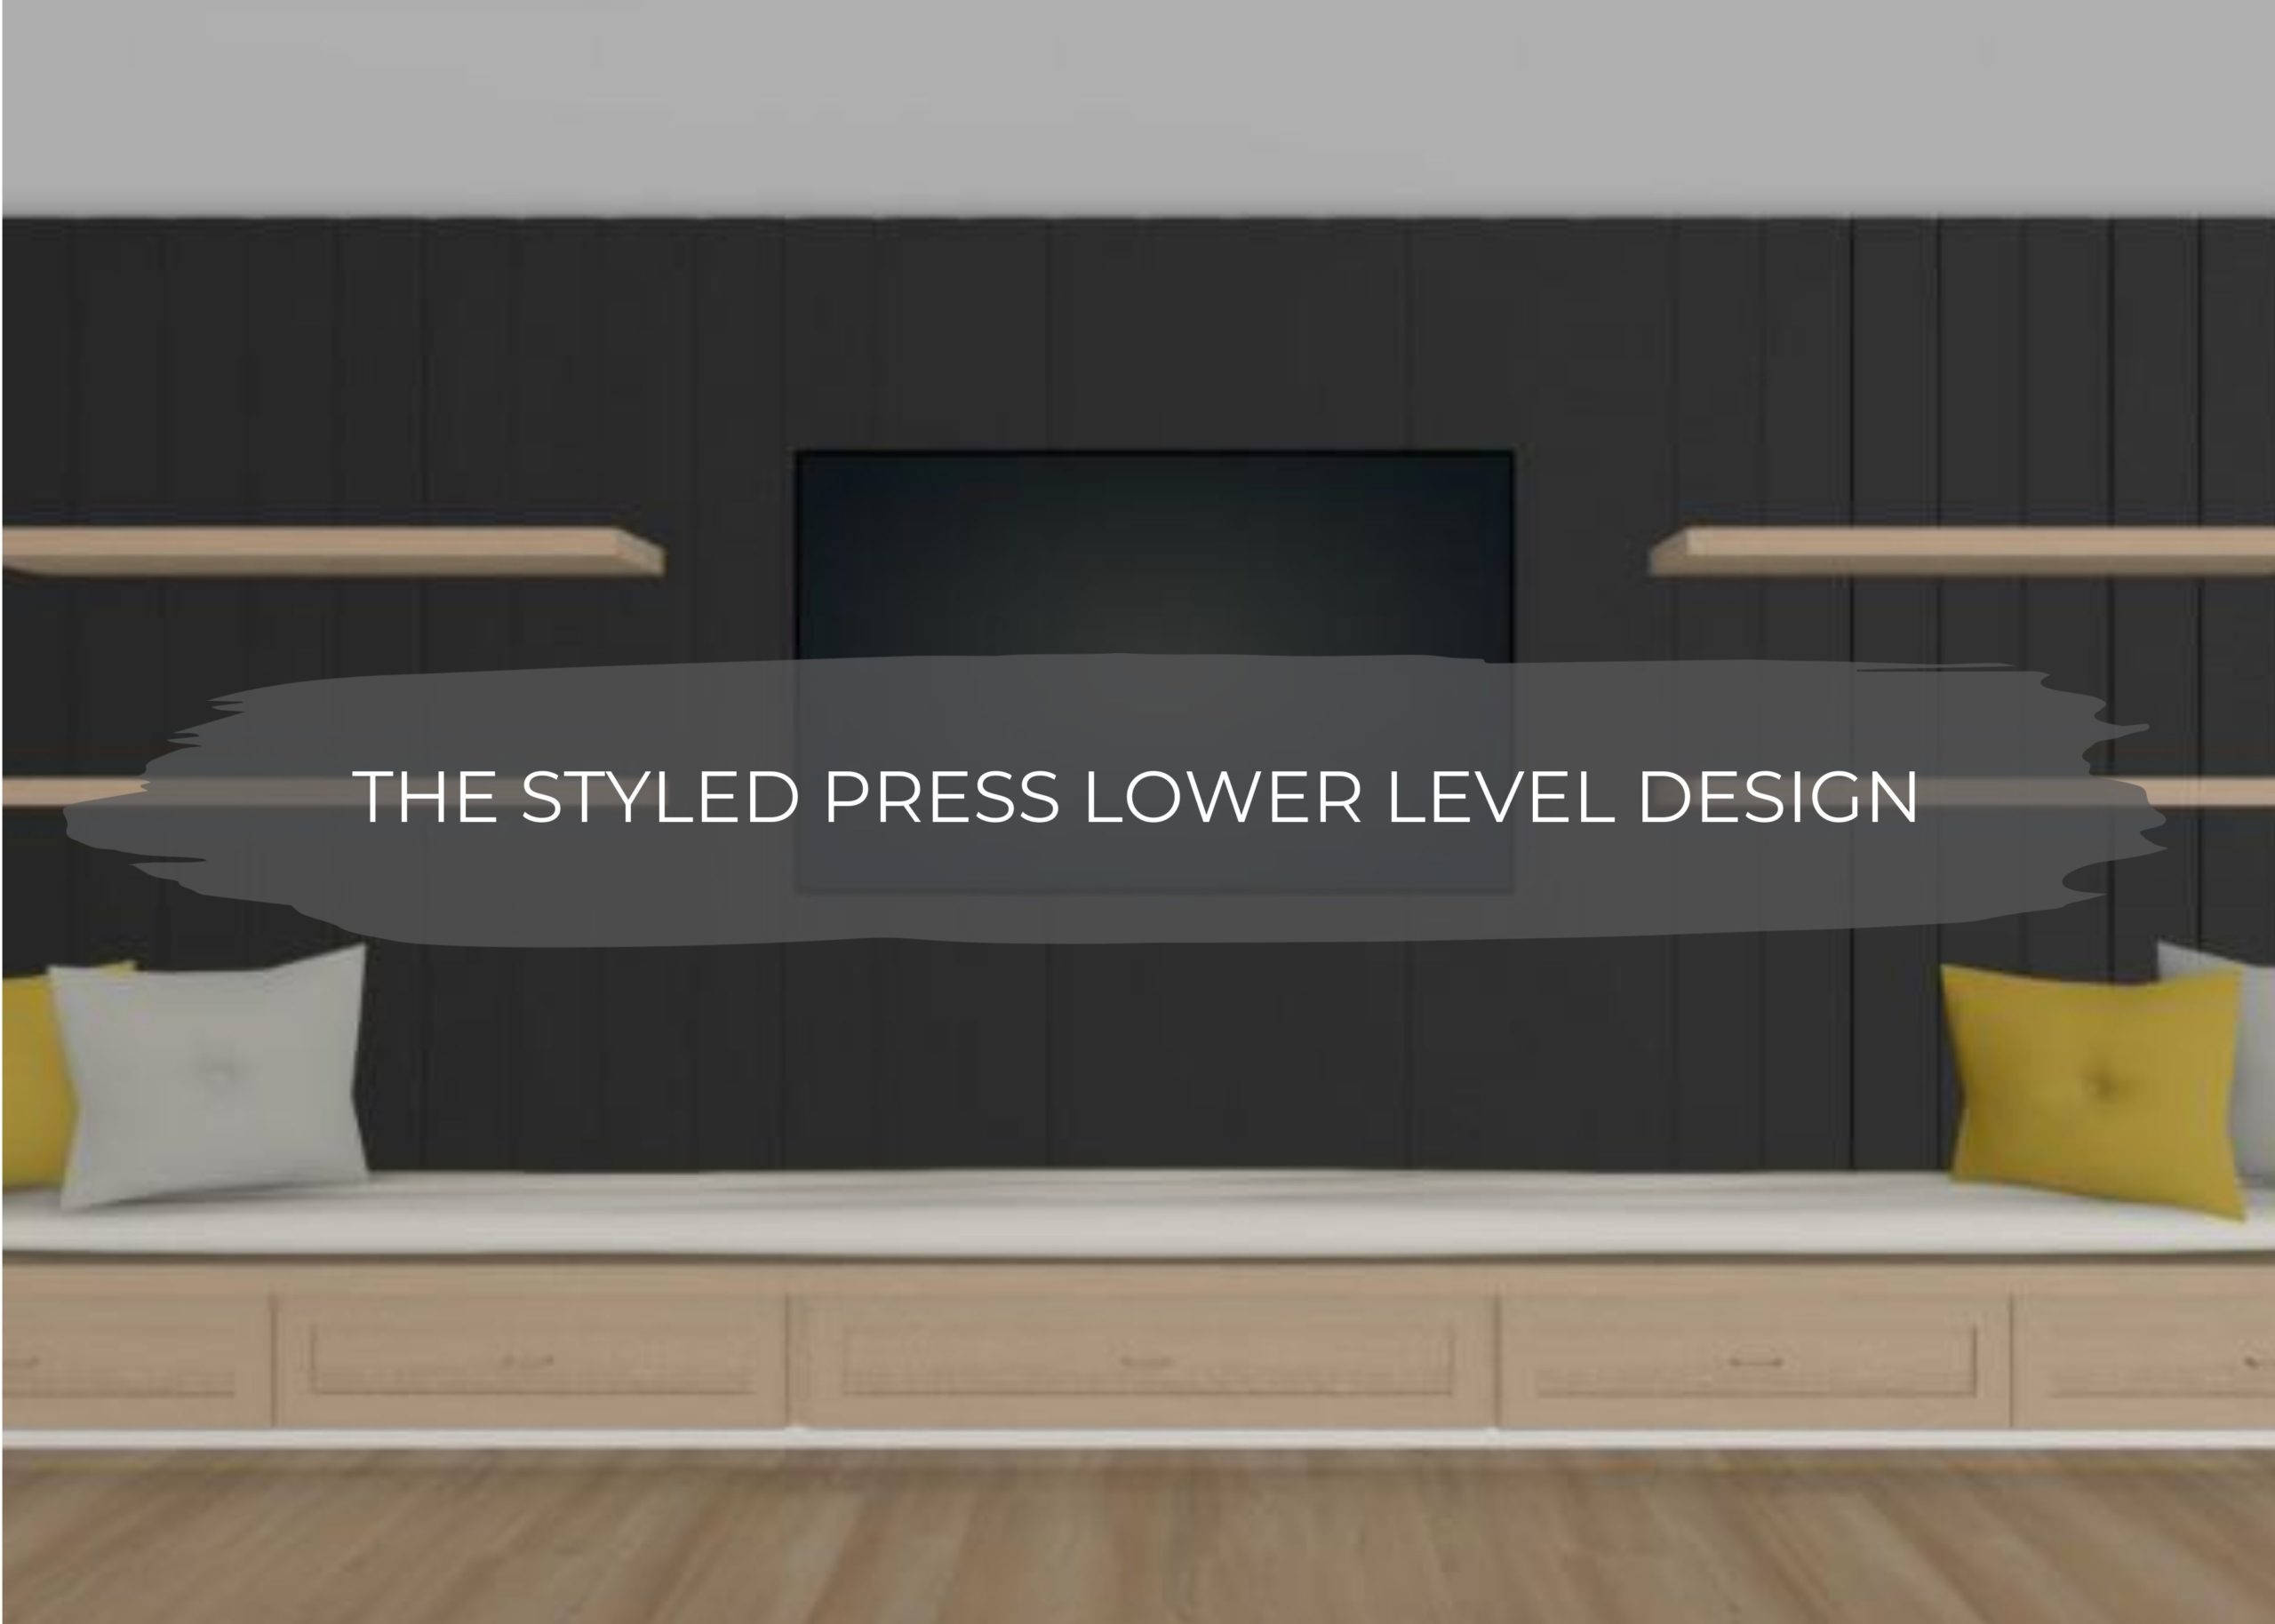 The Styled Press Lower Level Design